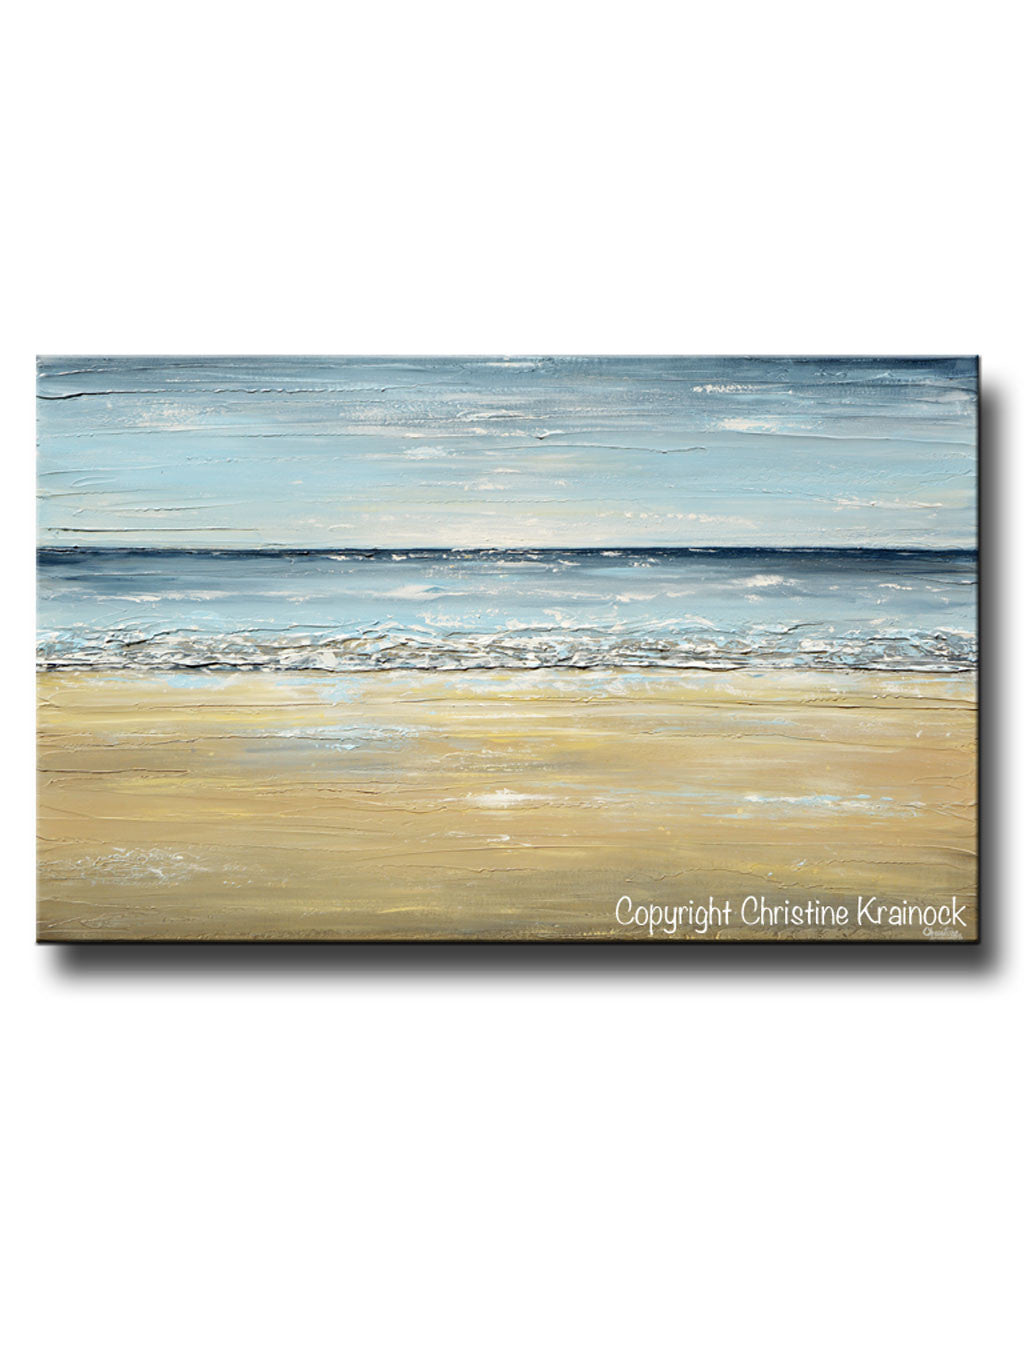 Load image into Gallery viewer, GICLEE PRINT Art Abstract Seascape Painting Beach Ocean Blue Beige White LARGE Canvas Coastal Decor - Christine Krainock Art - Contemporary Art by Christine - 1
